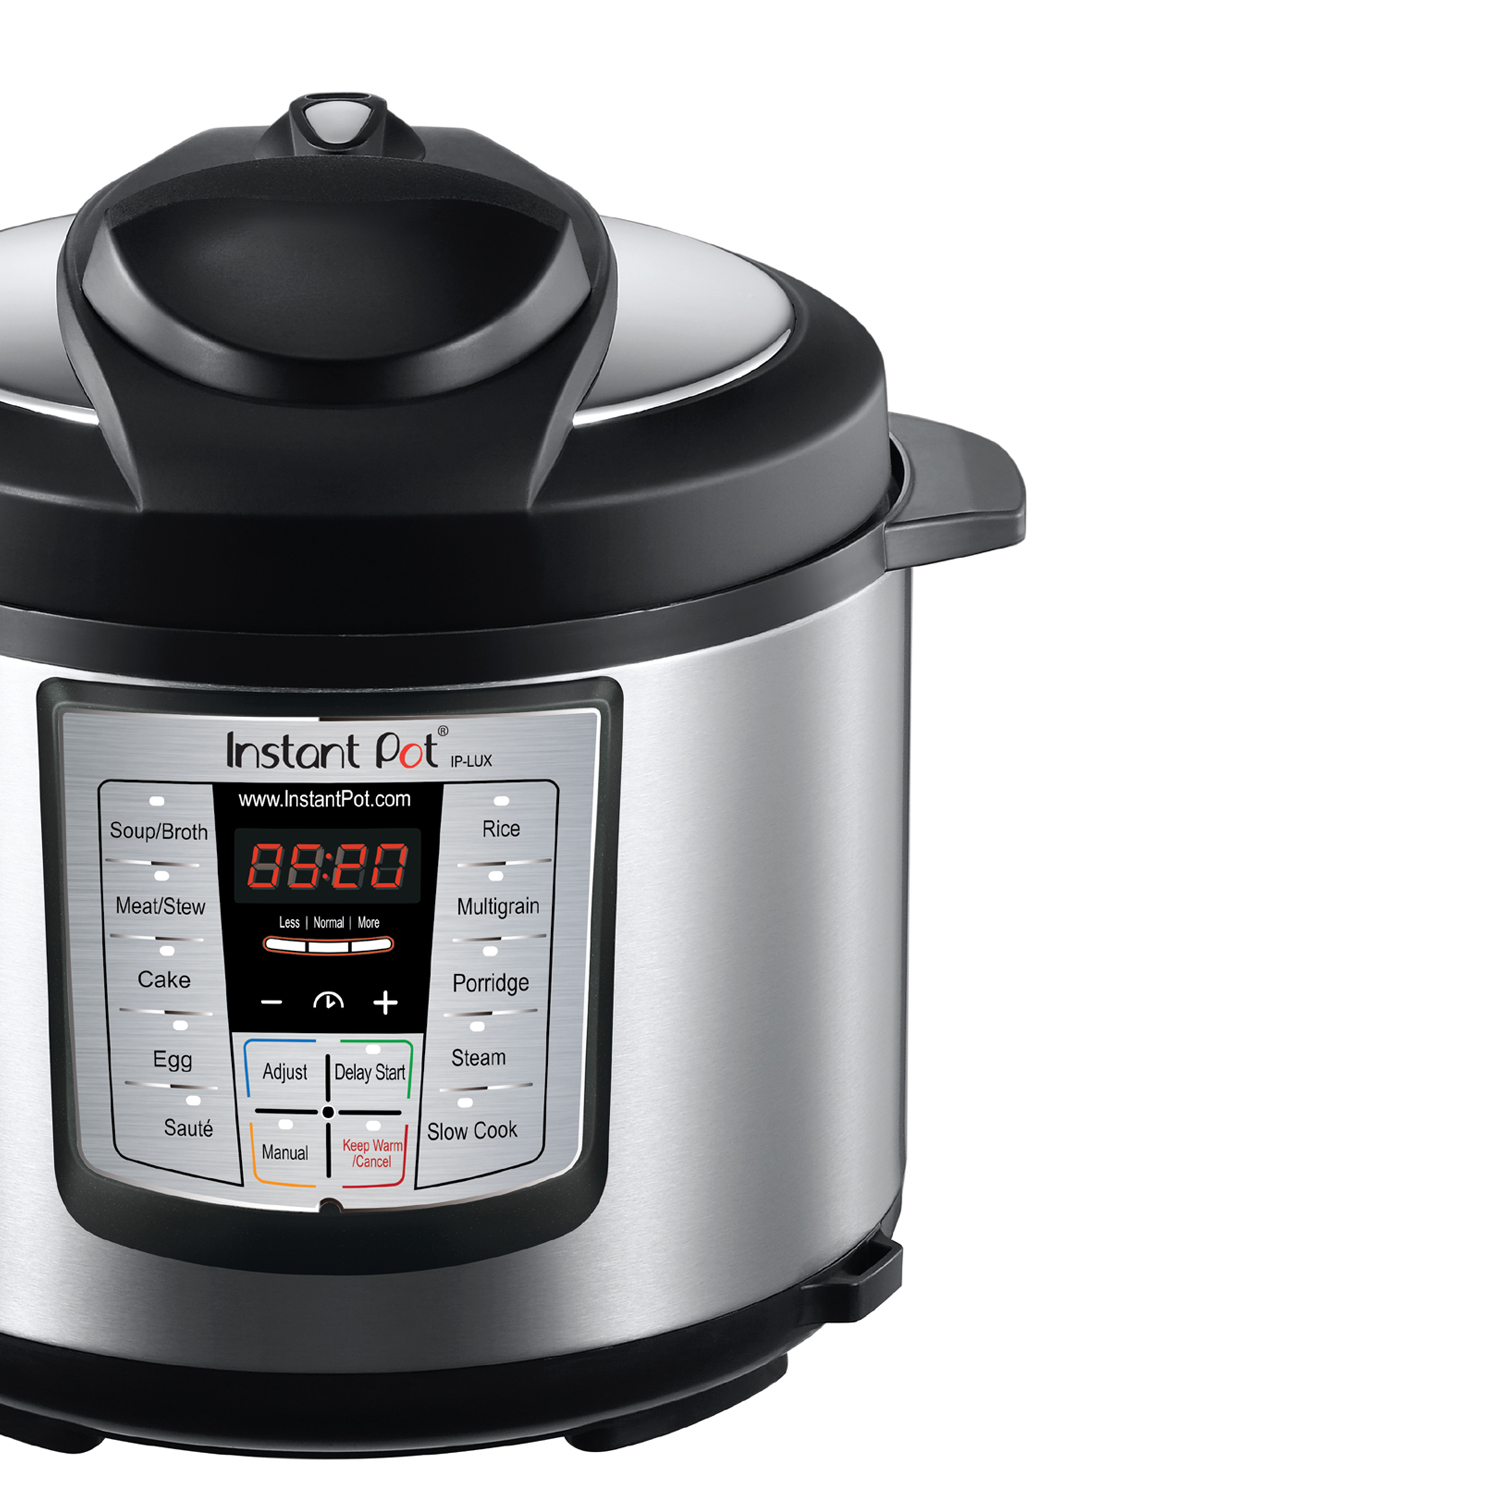 Instant Pot Stainless Steel Lux 5 Quart Multi-Use Programmable Pressure Cooker - image 2 of 5